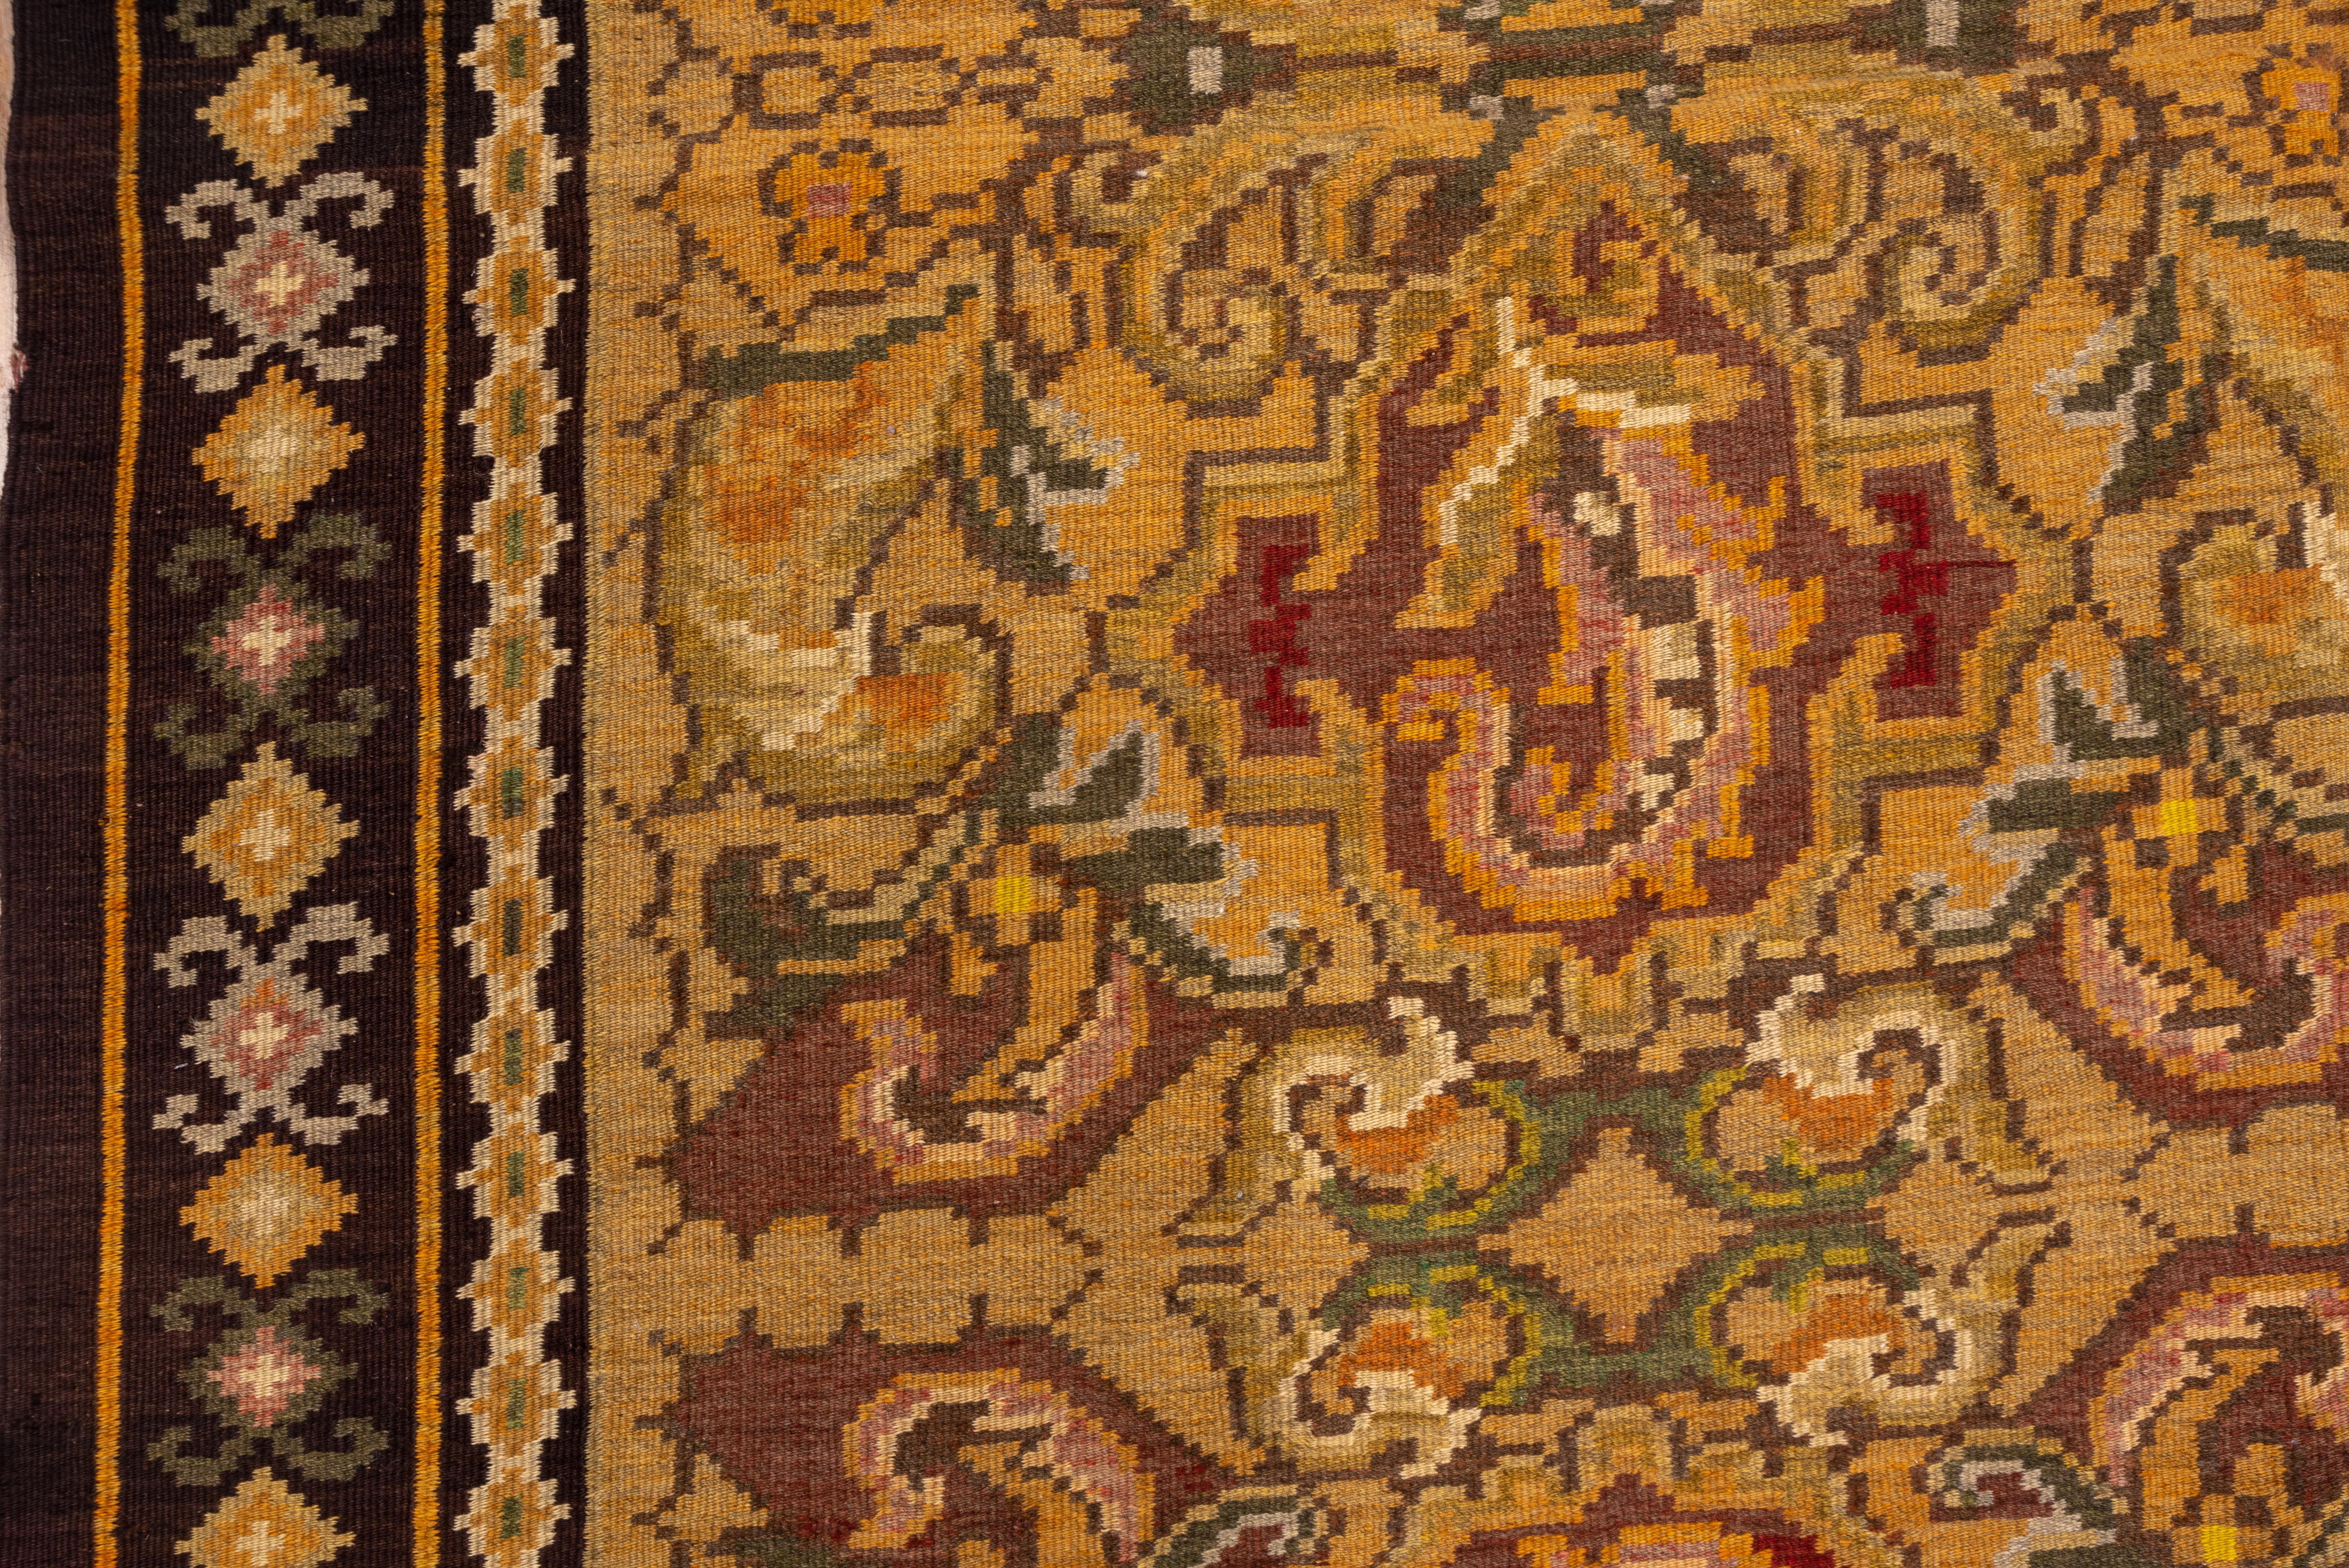 This southern Russian kilim-tapestry technique carpet shows a golden-tan field with a three echelon pattern of outline cartouches and barbed leaf-forms detailed in sienna, cream and salmon tan. Sienna border with chains of hooked and plain diamonds